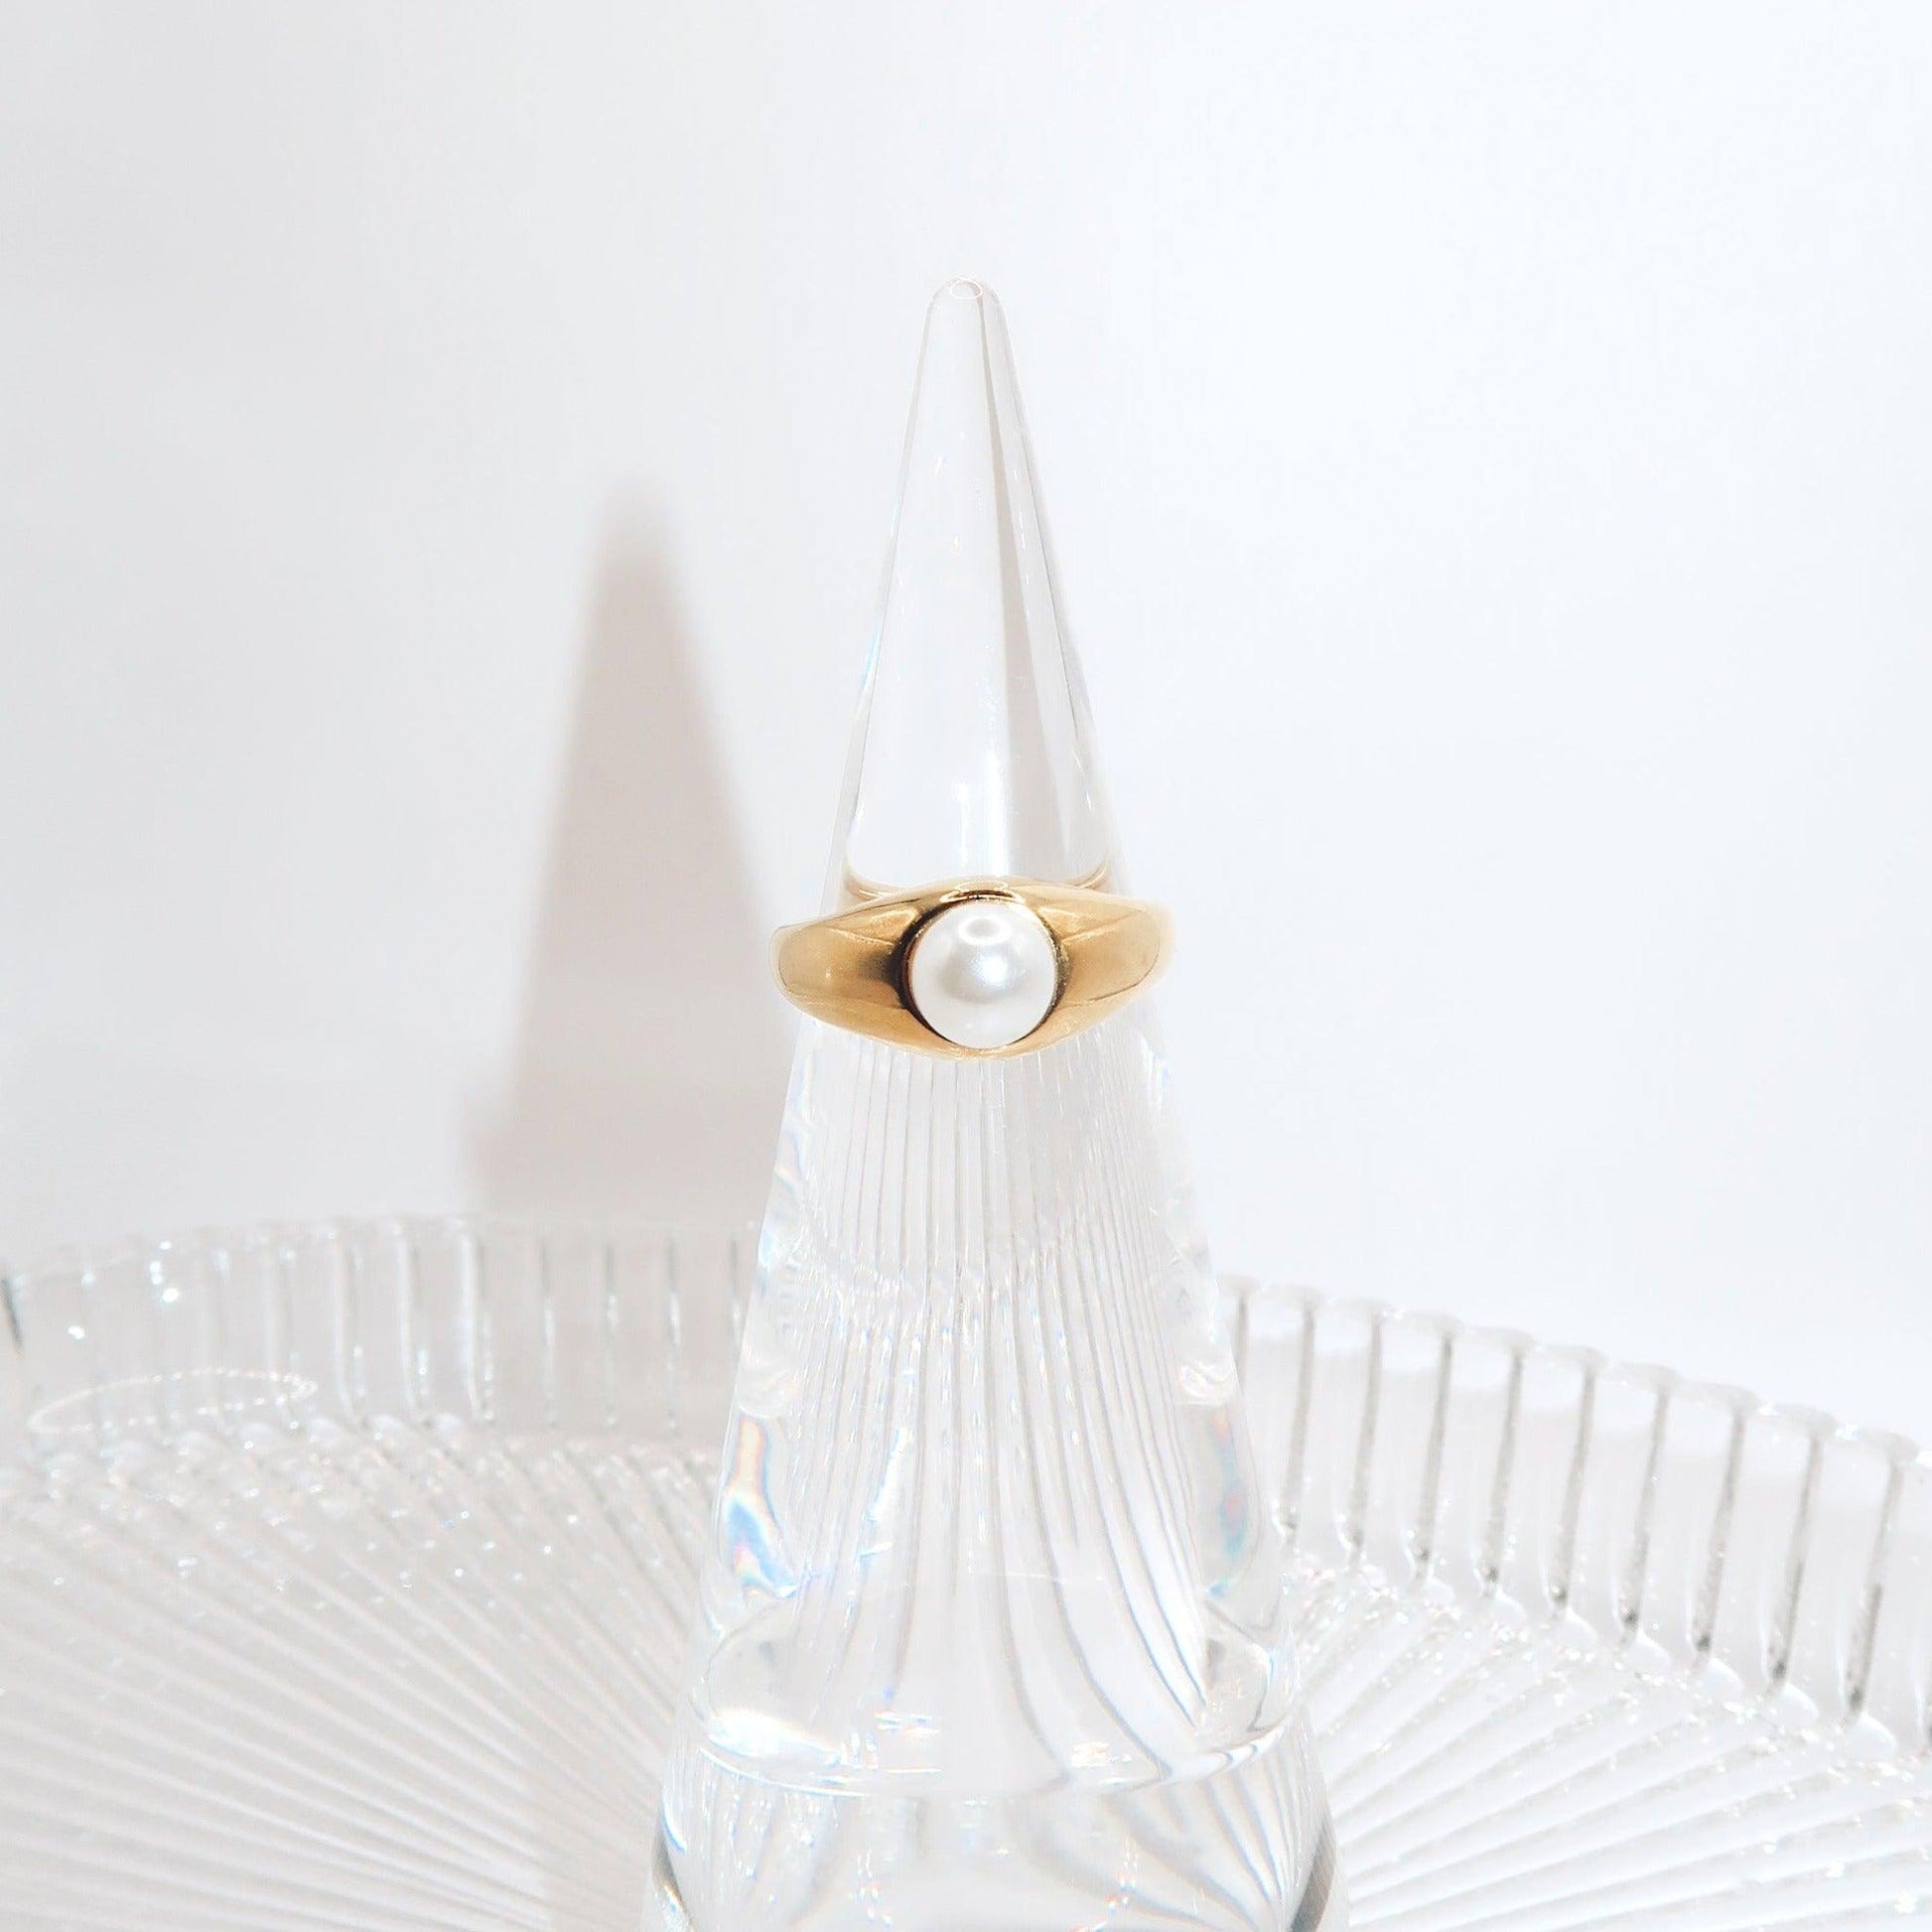 EMMA - 18K PVD Gold Plated Freshwater Pearl Ring - Mixed Metals